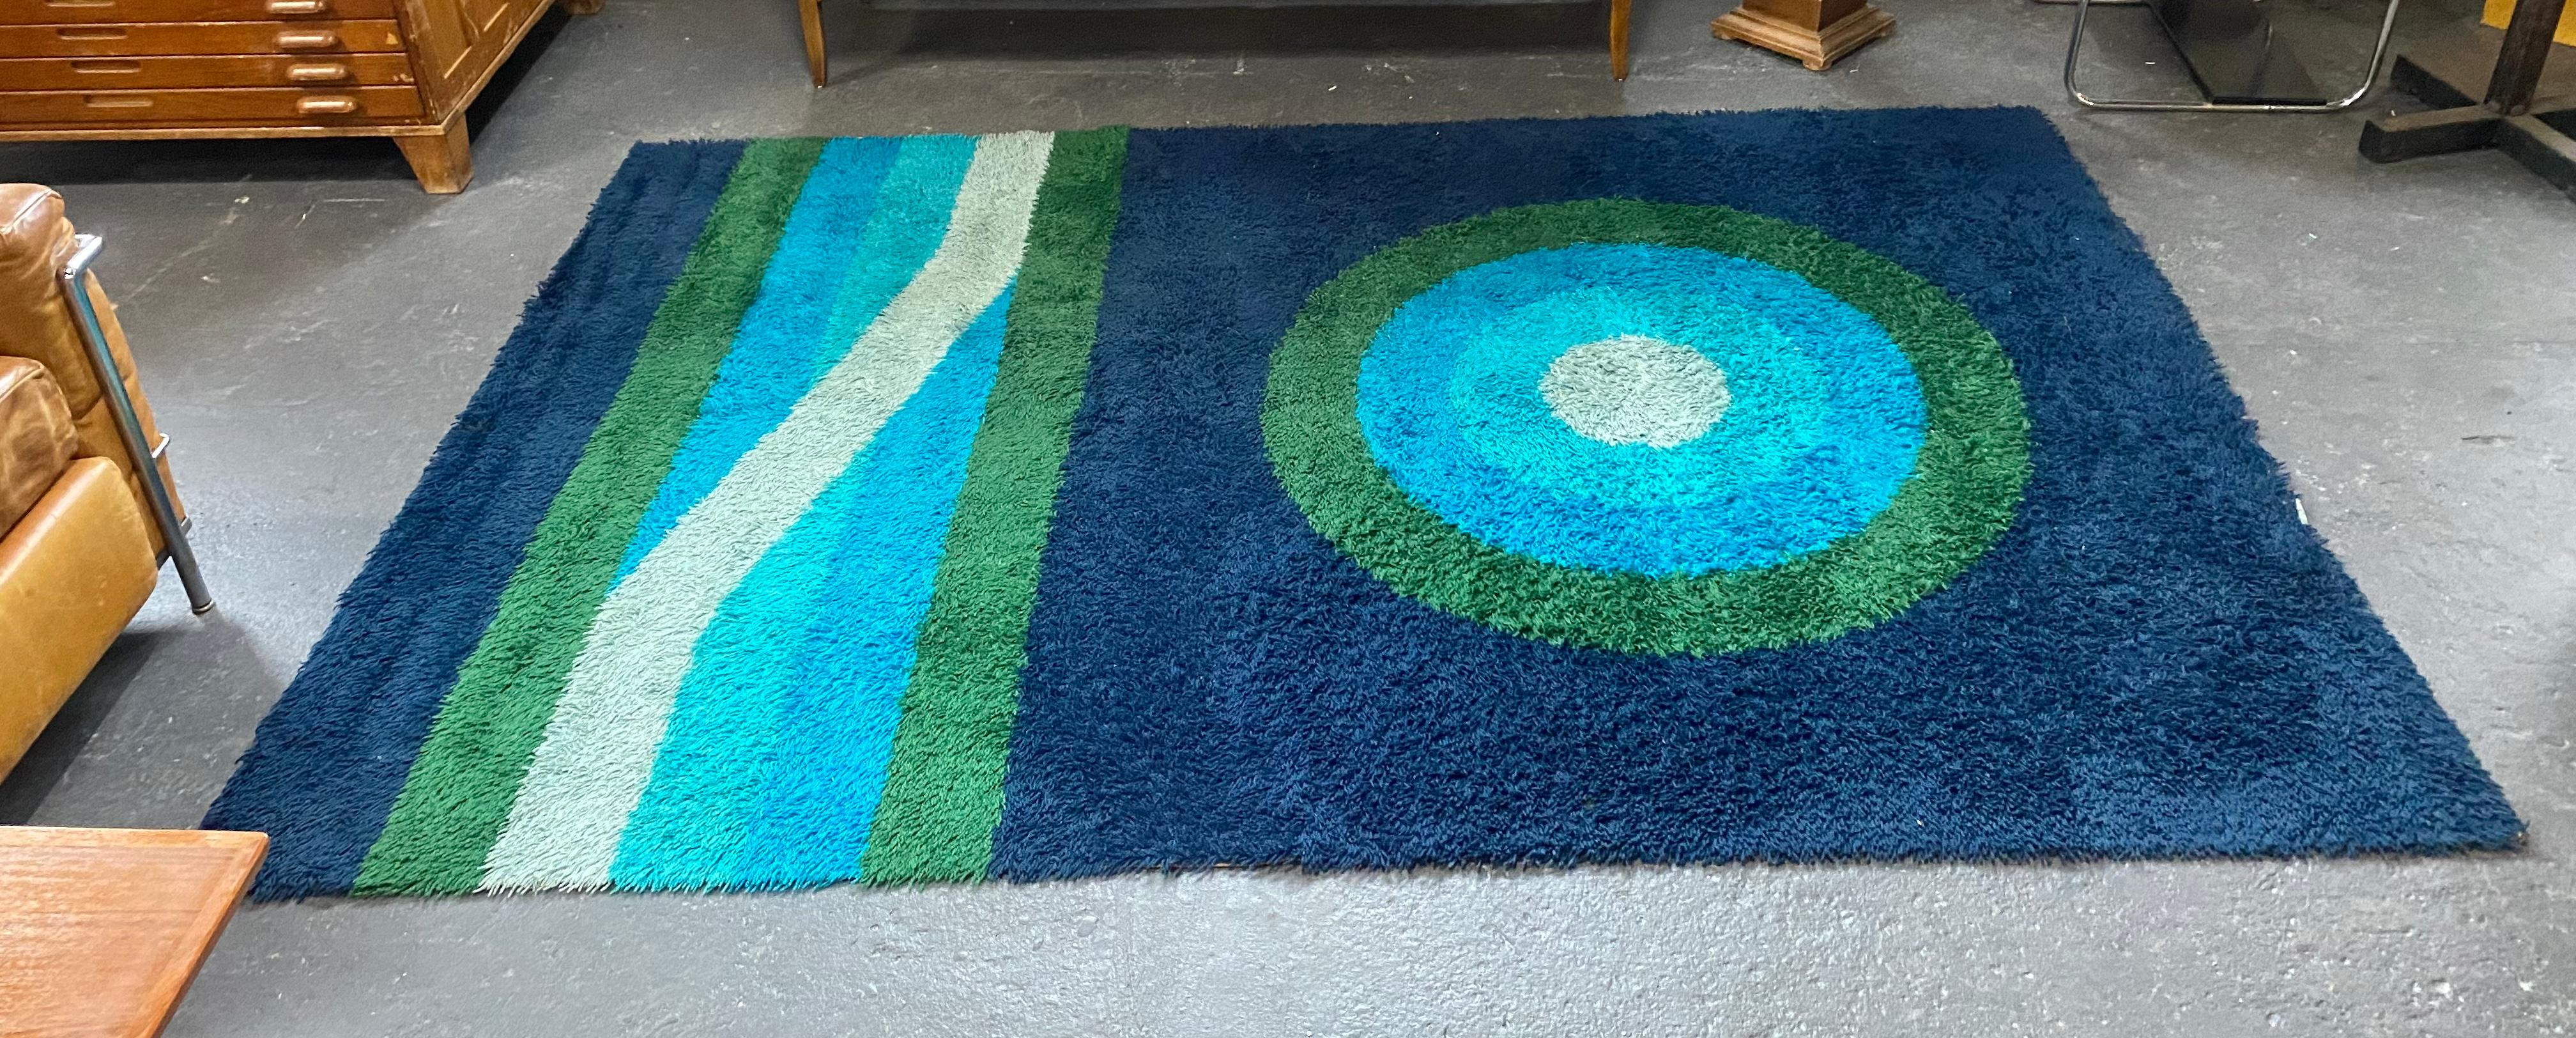 Late 20th Century Modernist Abstract Ege Rya Rug, 9 x 7, Blues and Greens  For Sale